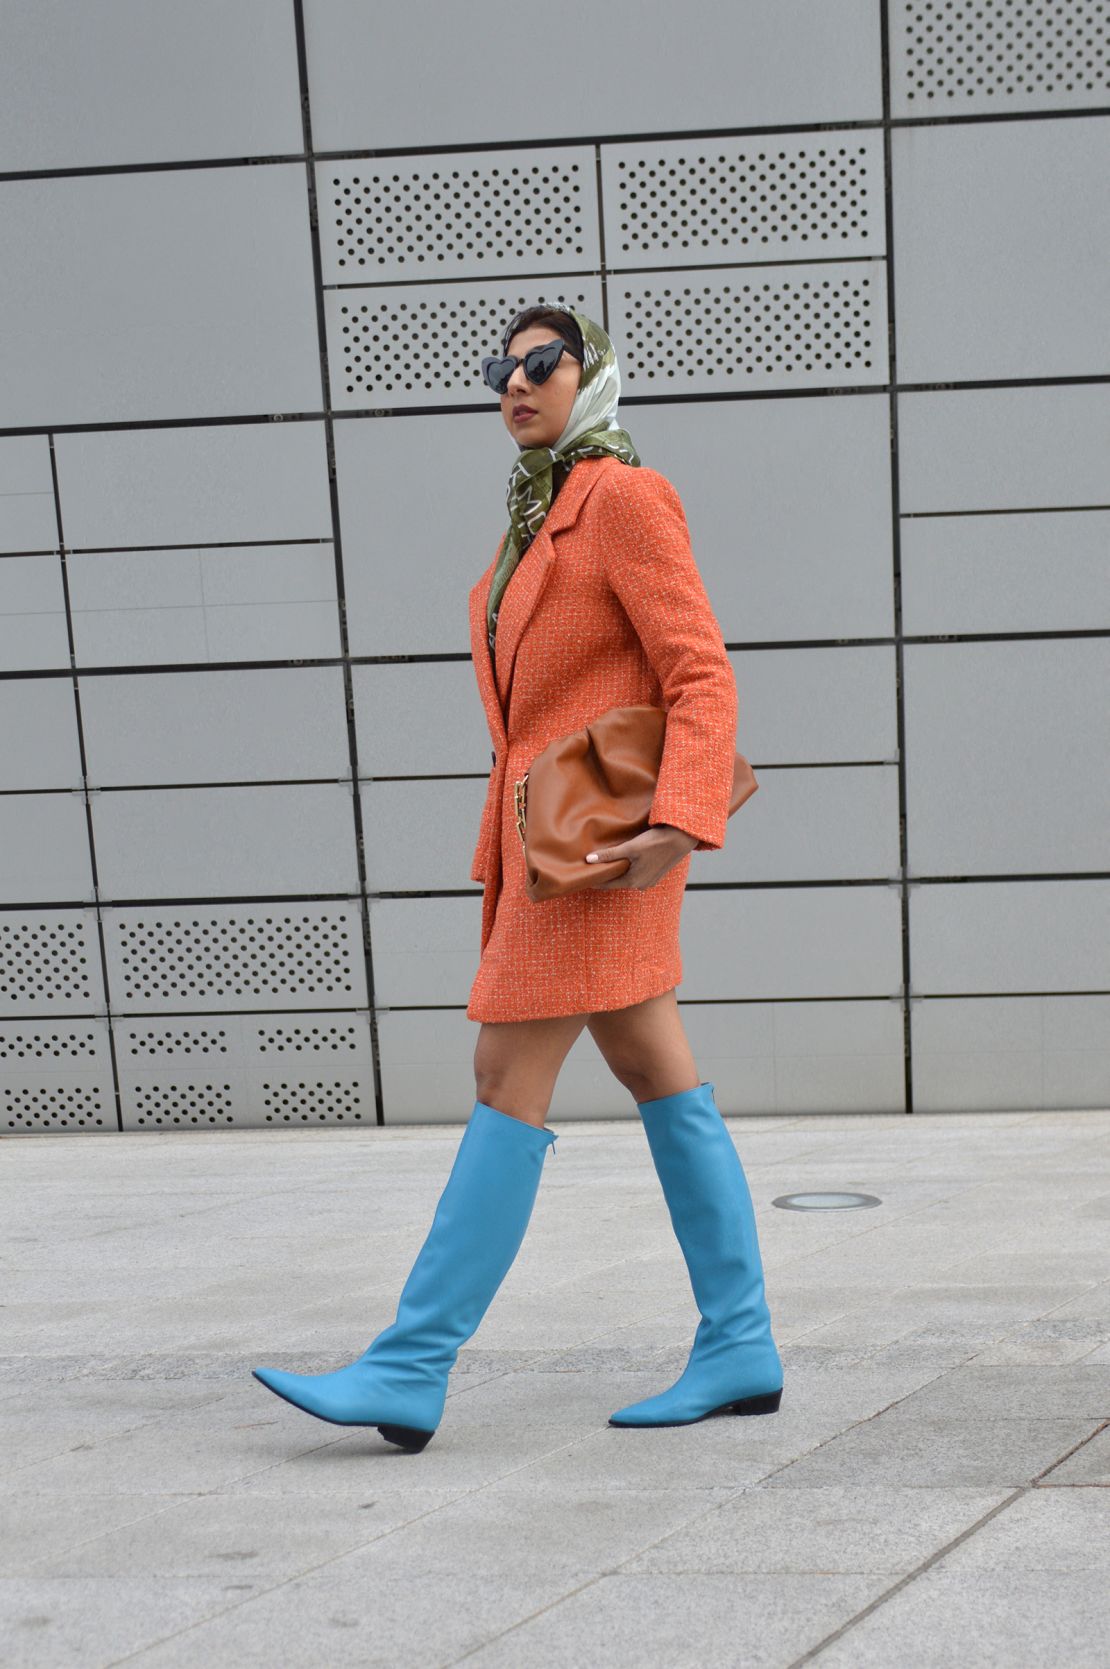 Pops of color seen at Seoul Fashion Week on Thursday.